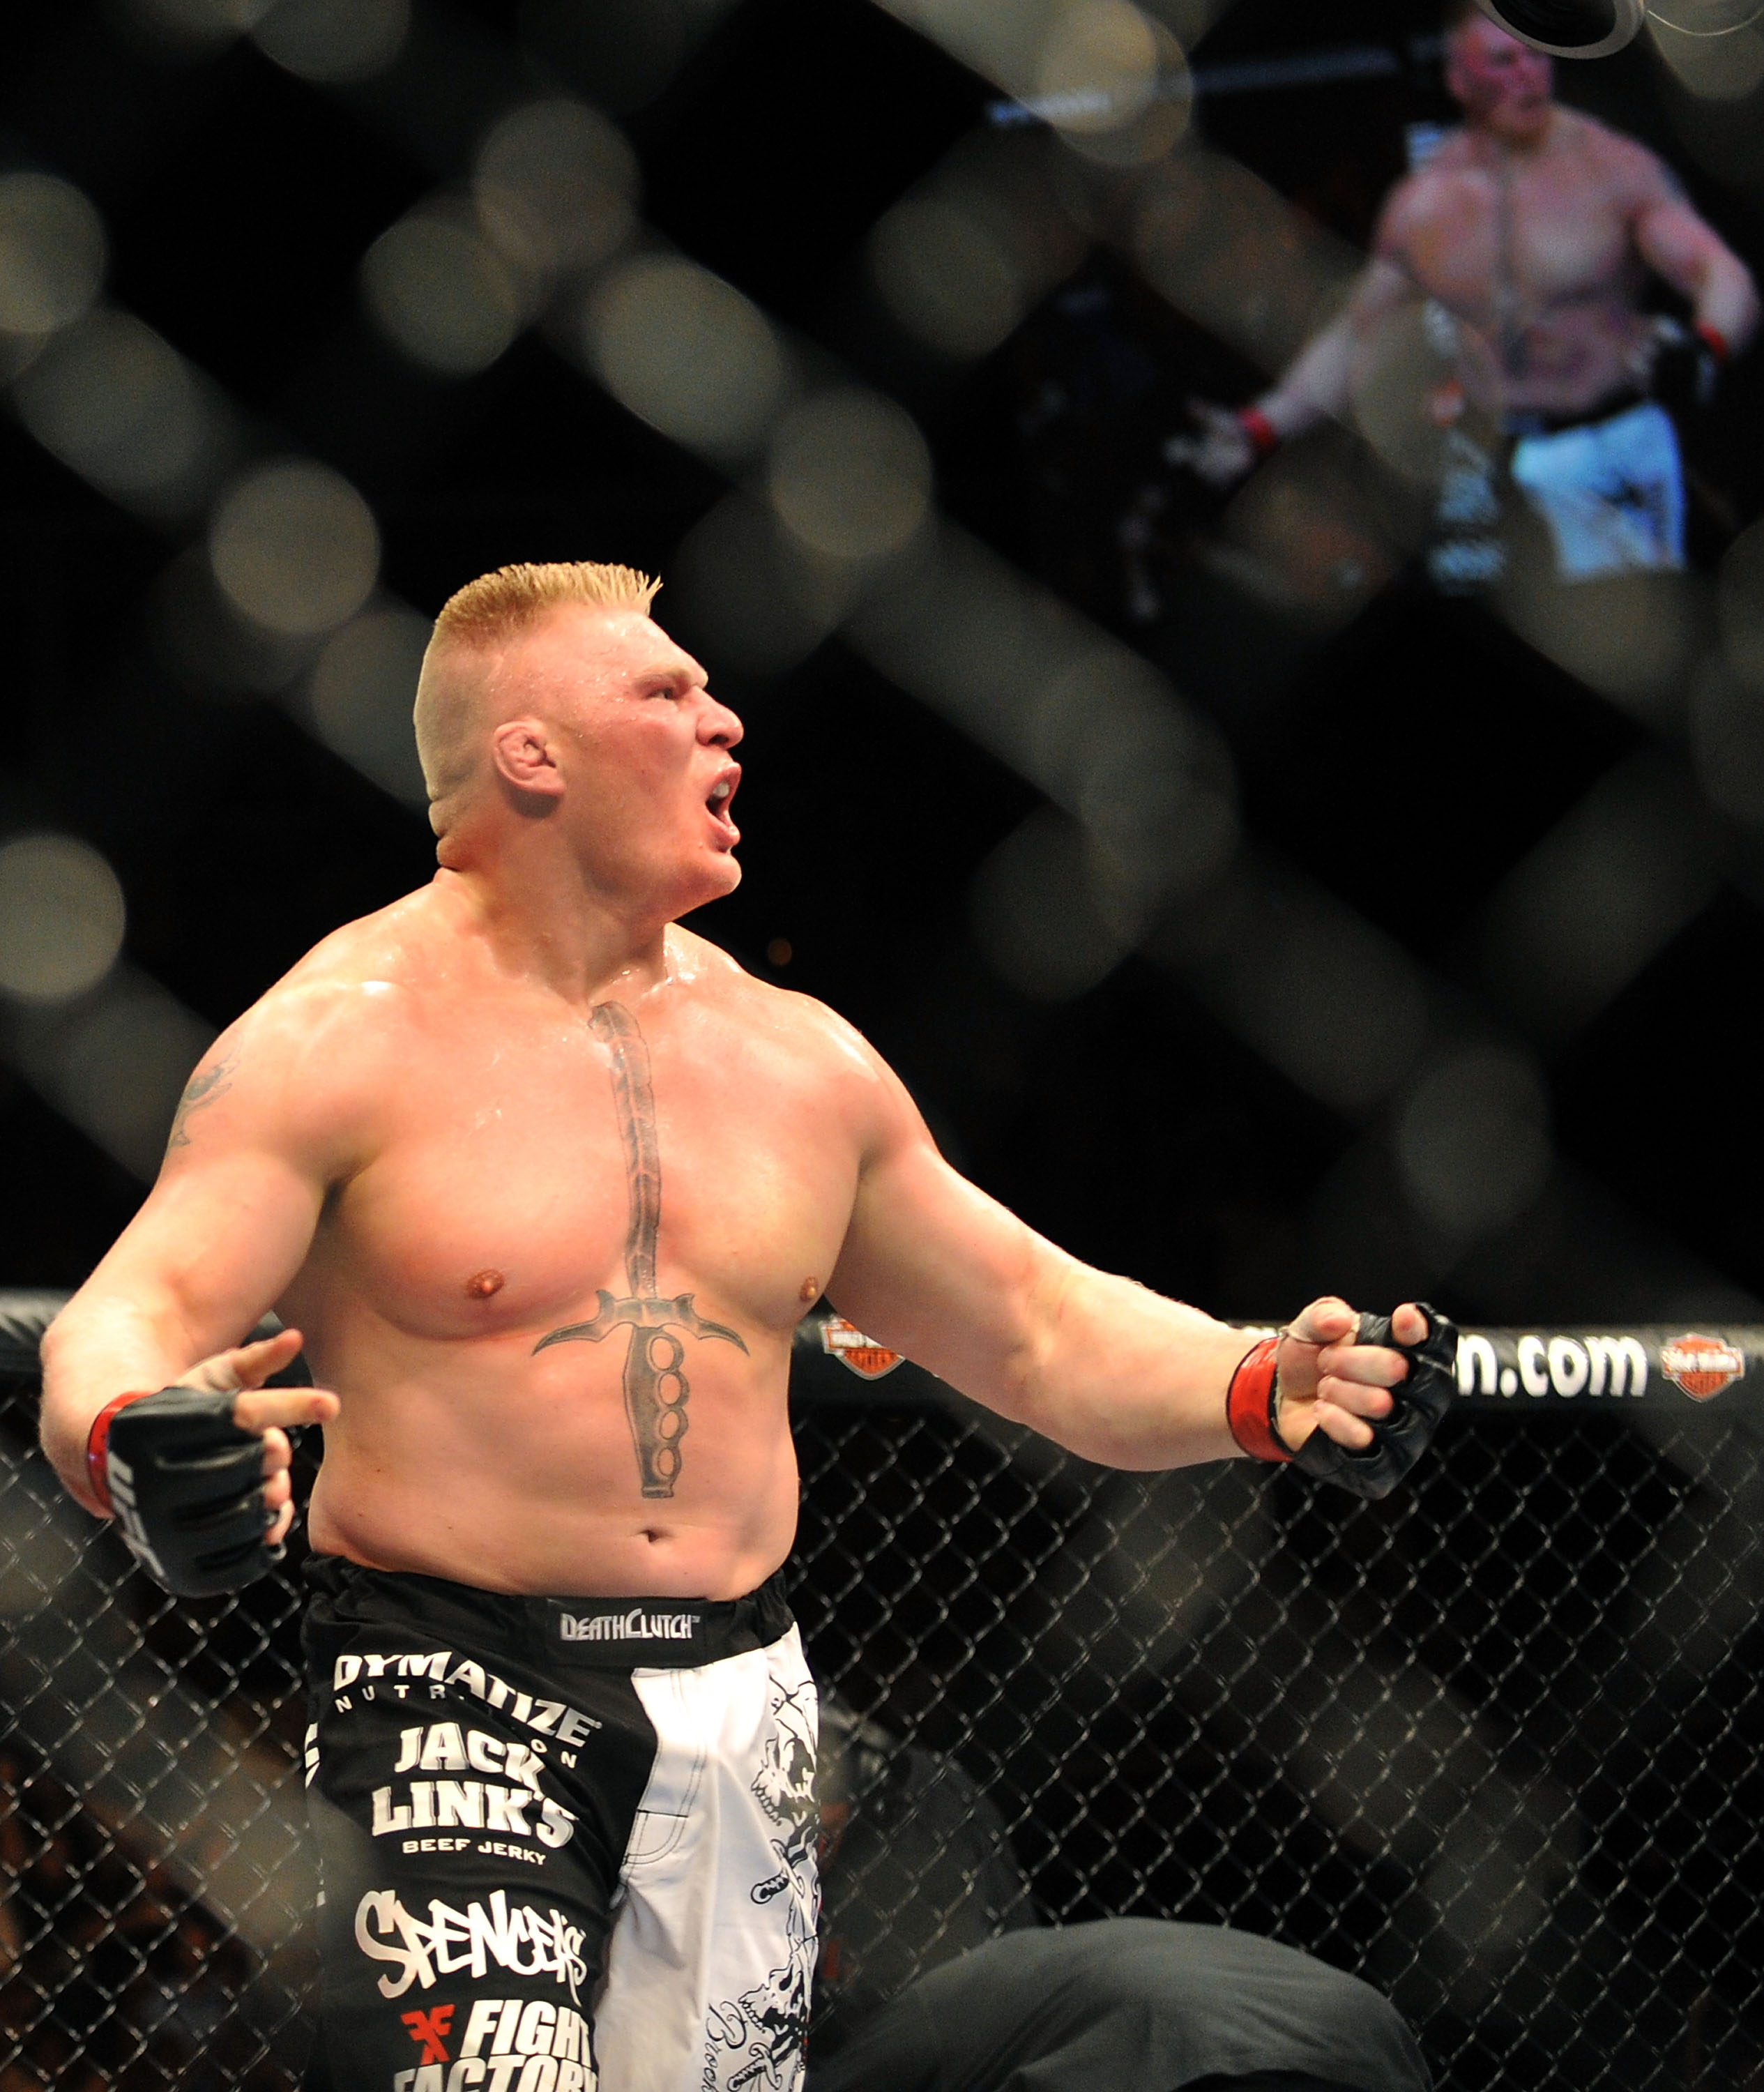 LAS VEGAS - JULY 11:  Brock Lesnar reacts after knocking out Frank Mir during their heavyweight title bout during UFC 100 on July 11, 2009 in Las Vegas, Nevada.  (Photo by Jon Kopaloff/Getty Images)